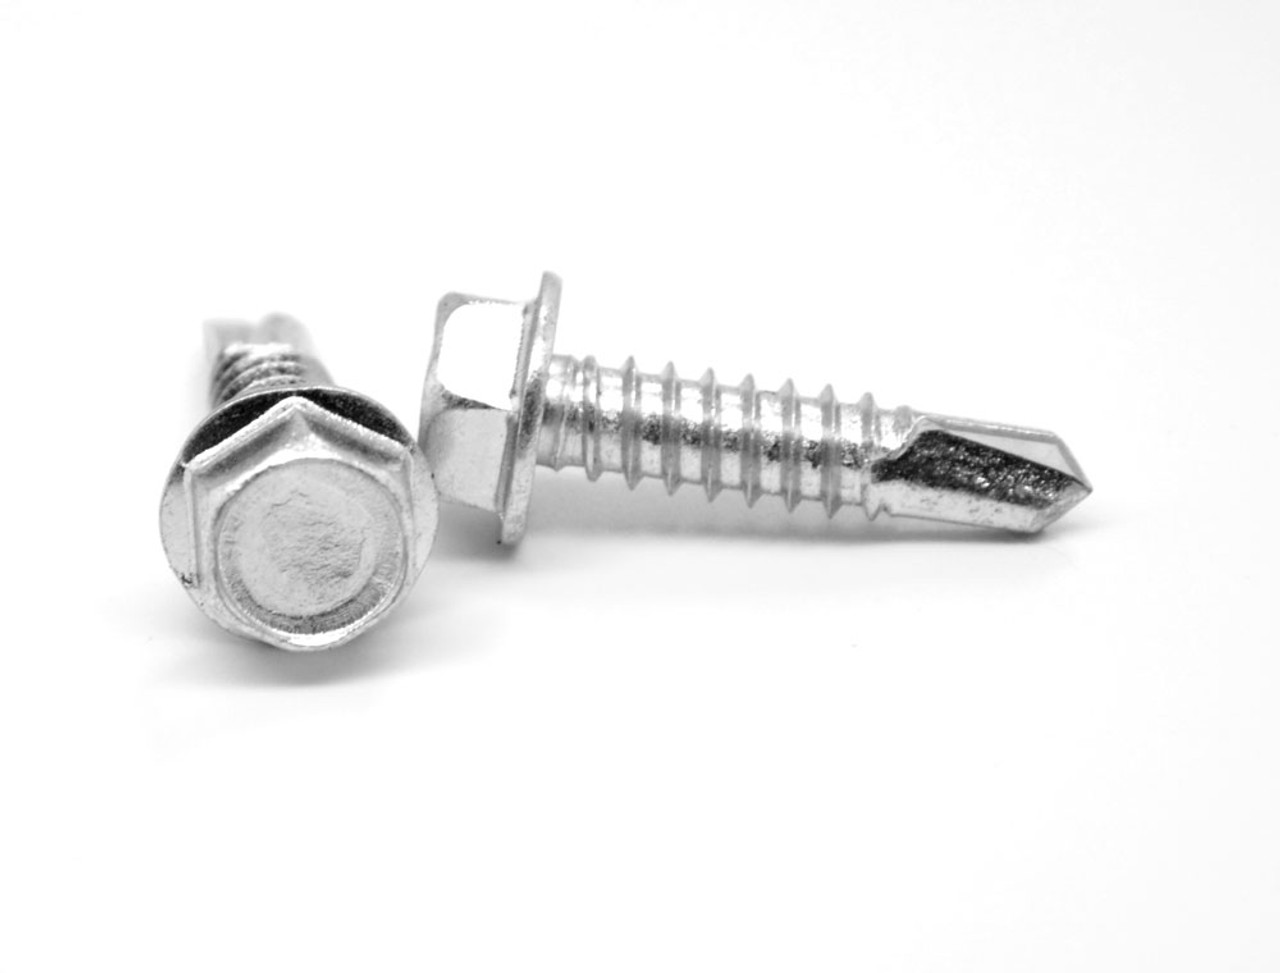 #12-14 x 1 1/2" (FT) Self Drilling Screw Hex Washer Head #3 Point Stainless Steel 18-8